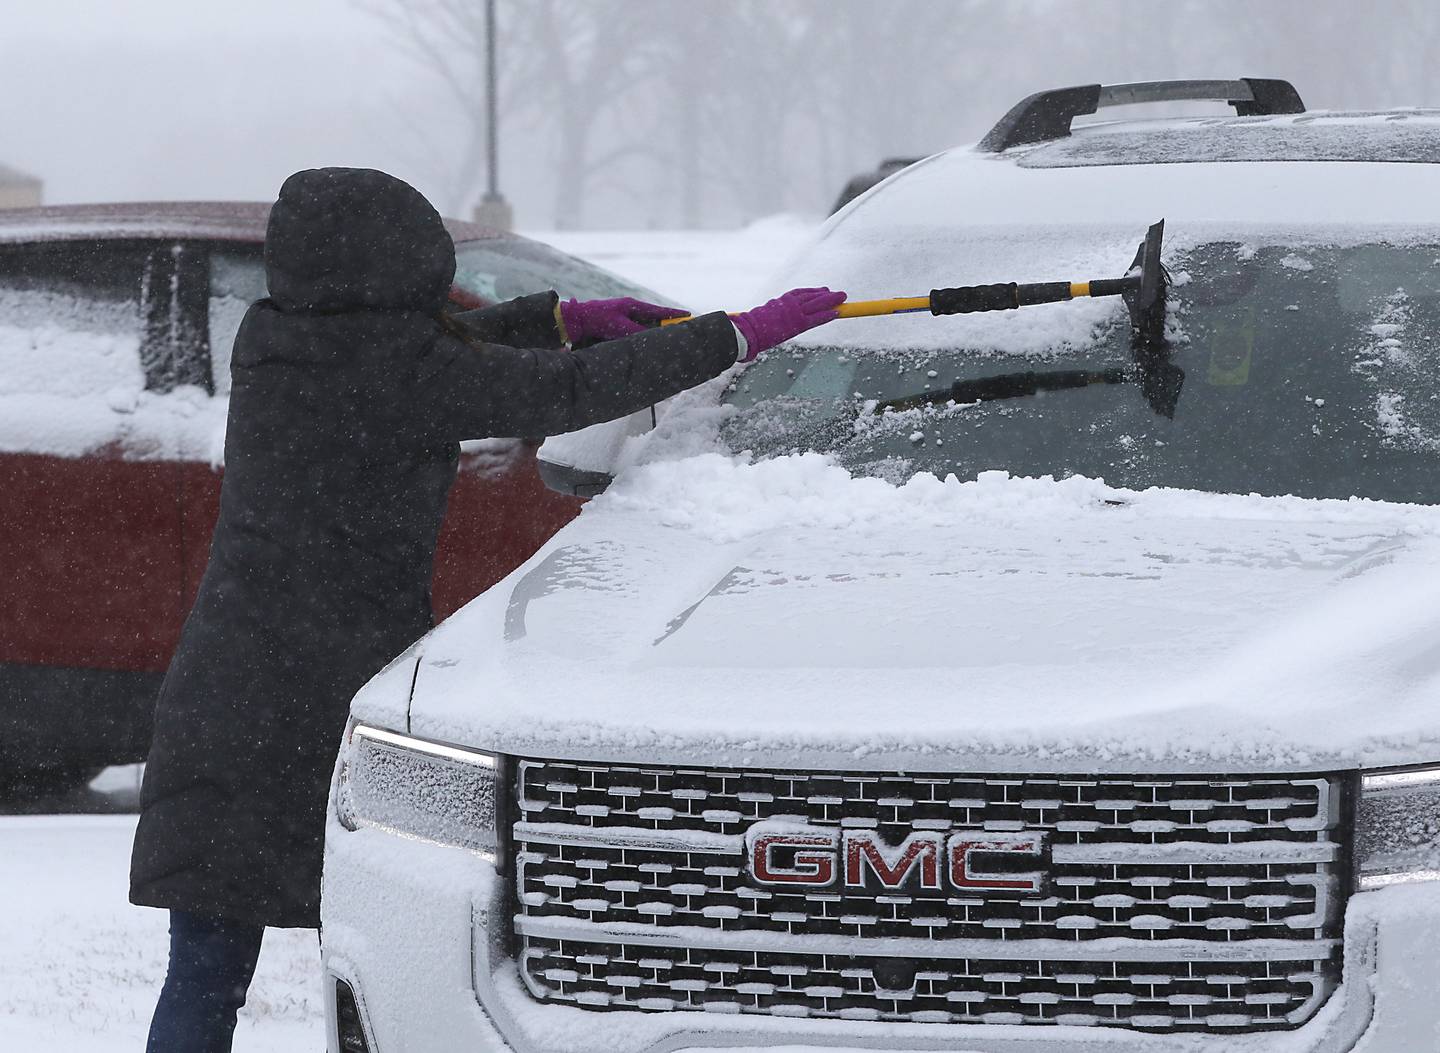 Teacher Leah Pinkowski cleans the windows of her car Thursday, Feb. 16, 2023, at Richmond-Burton Community High School in Richmond, after a winter storm moved through McHenry County creating hazardous driving conditions.